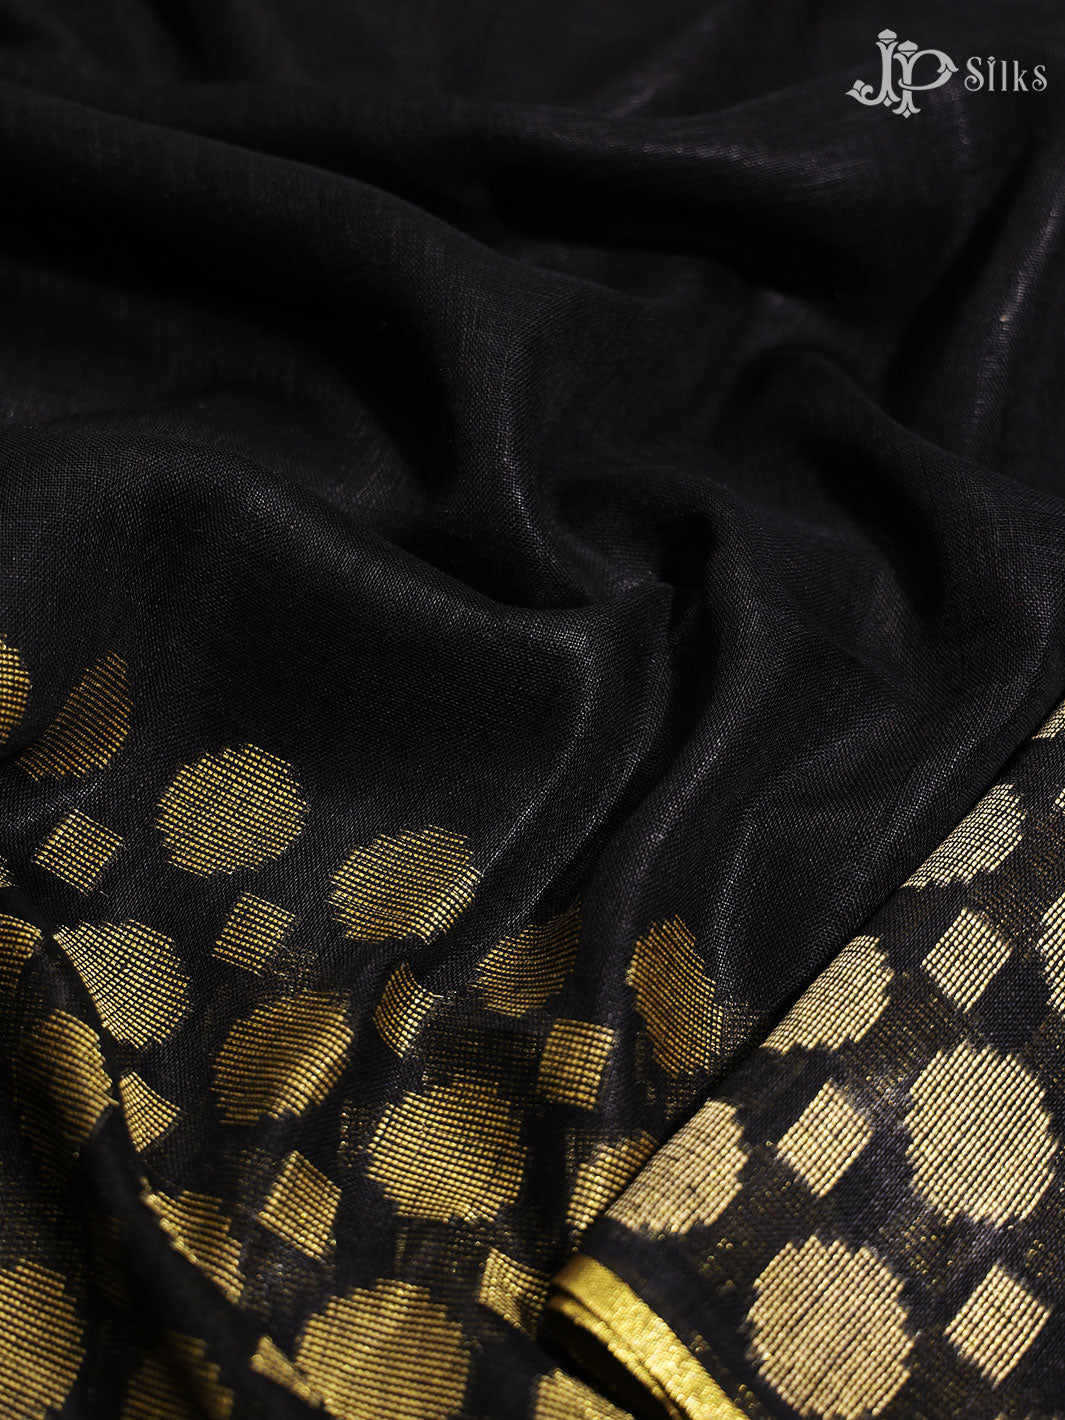 Black and Gold Linen Fancy Saree - D8327 - View 5